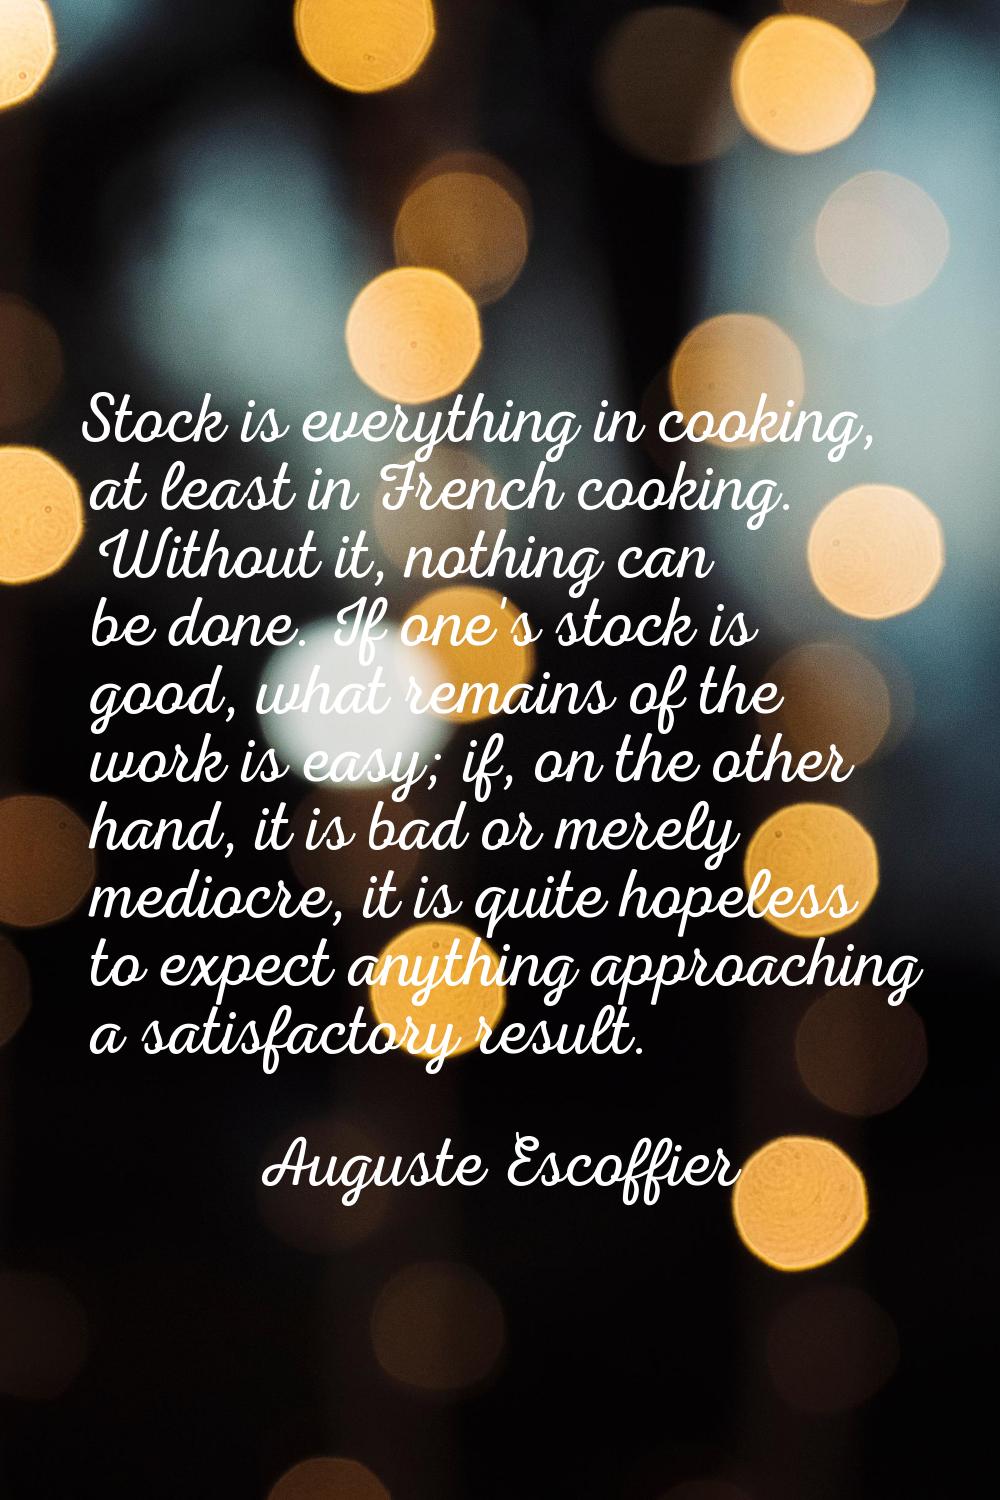 Stock is everything in cooking, at least in French cooking. Without it, nothing can be done. If one